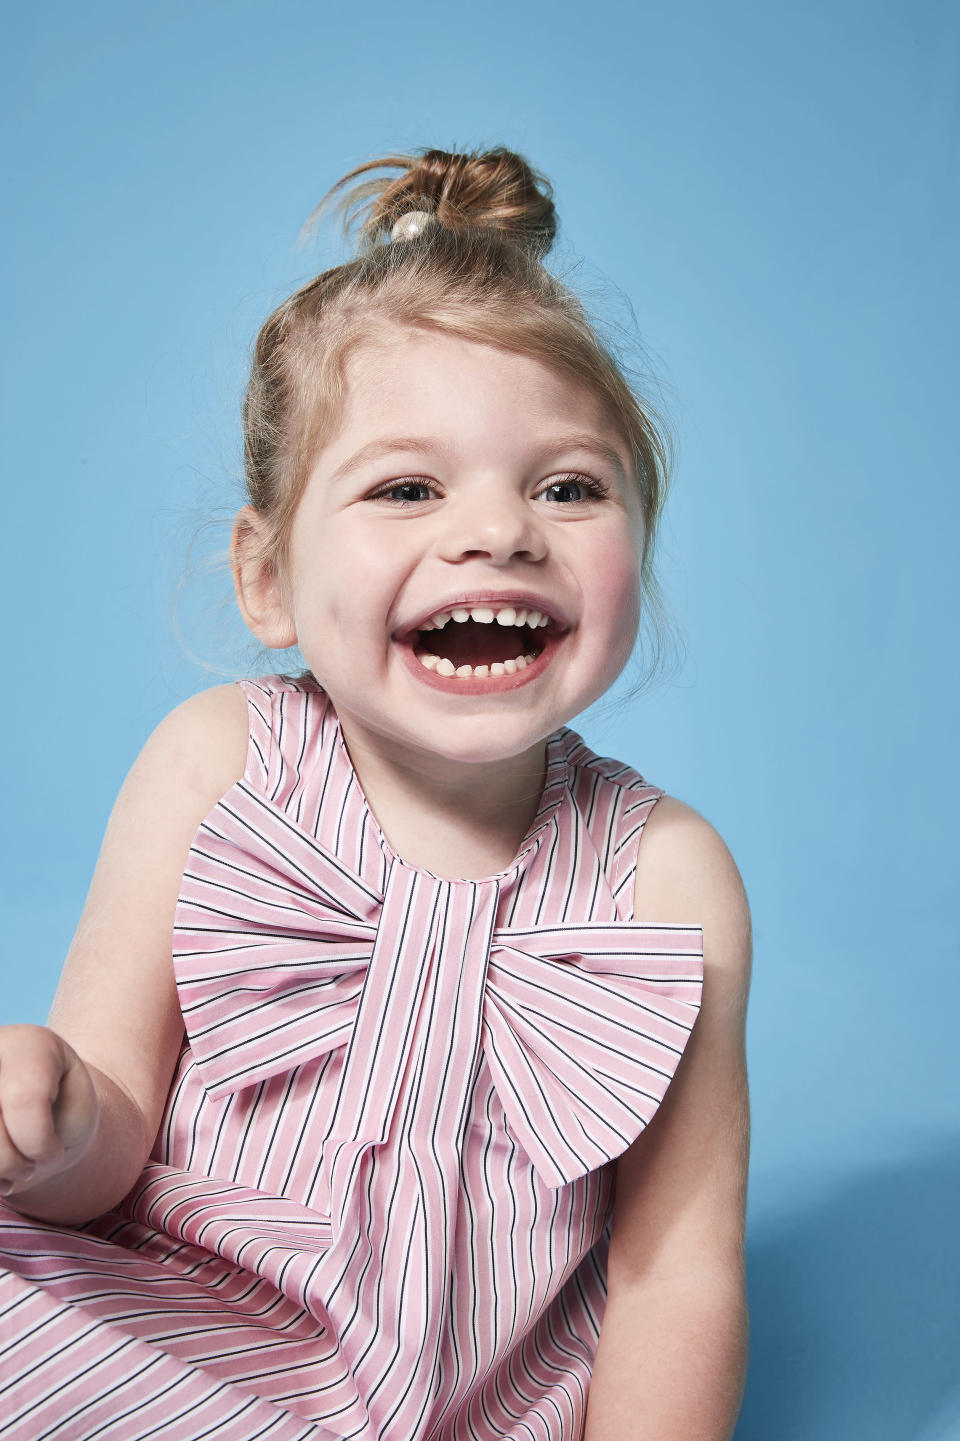 We’re loving River Island’s new campaign which features children with disabilities [Photo: River Island]